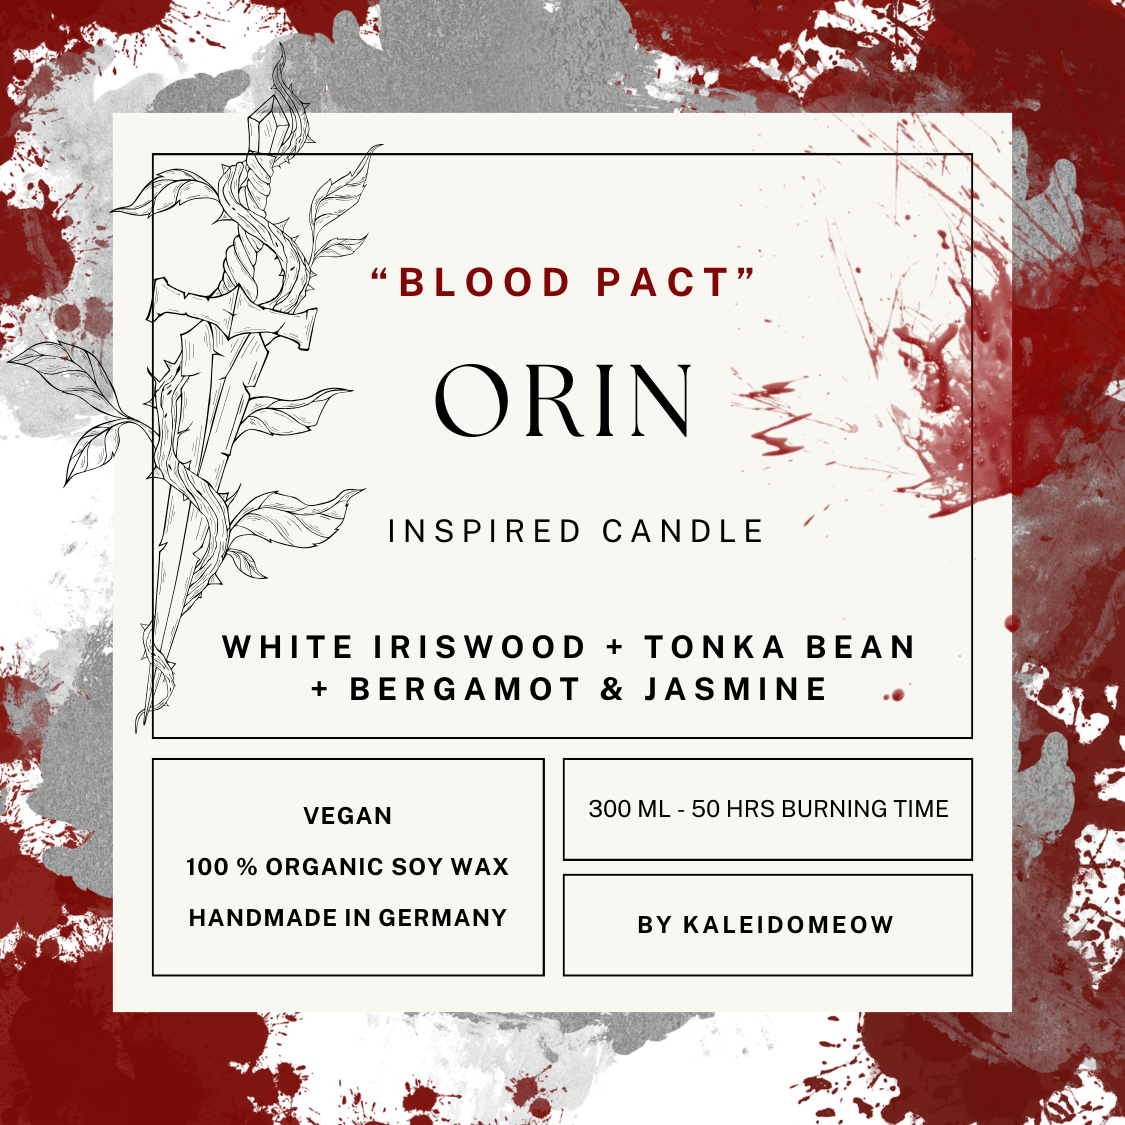 Orin inspired candle - 'Blood Pact' Baldurs Gate 3 inspired soy Candles 300 ML